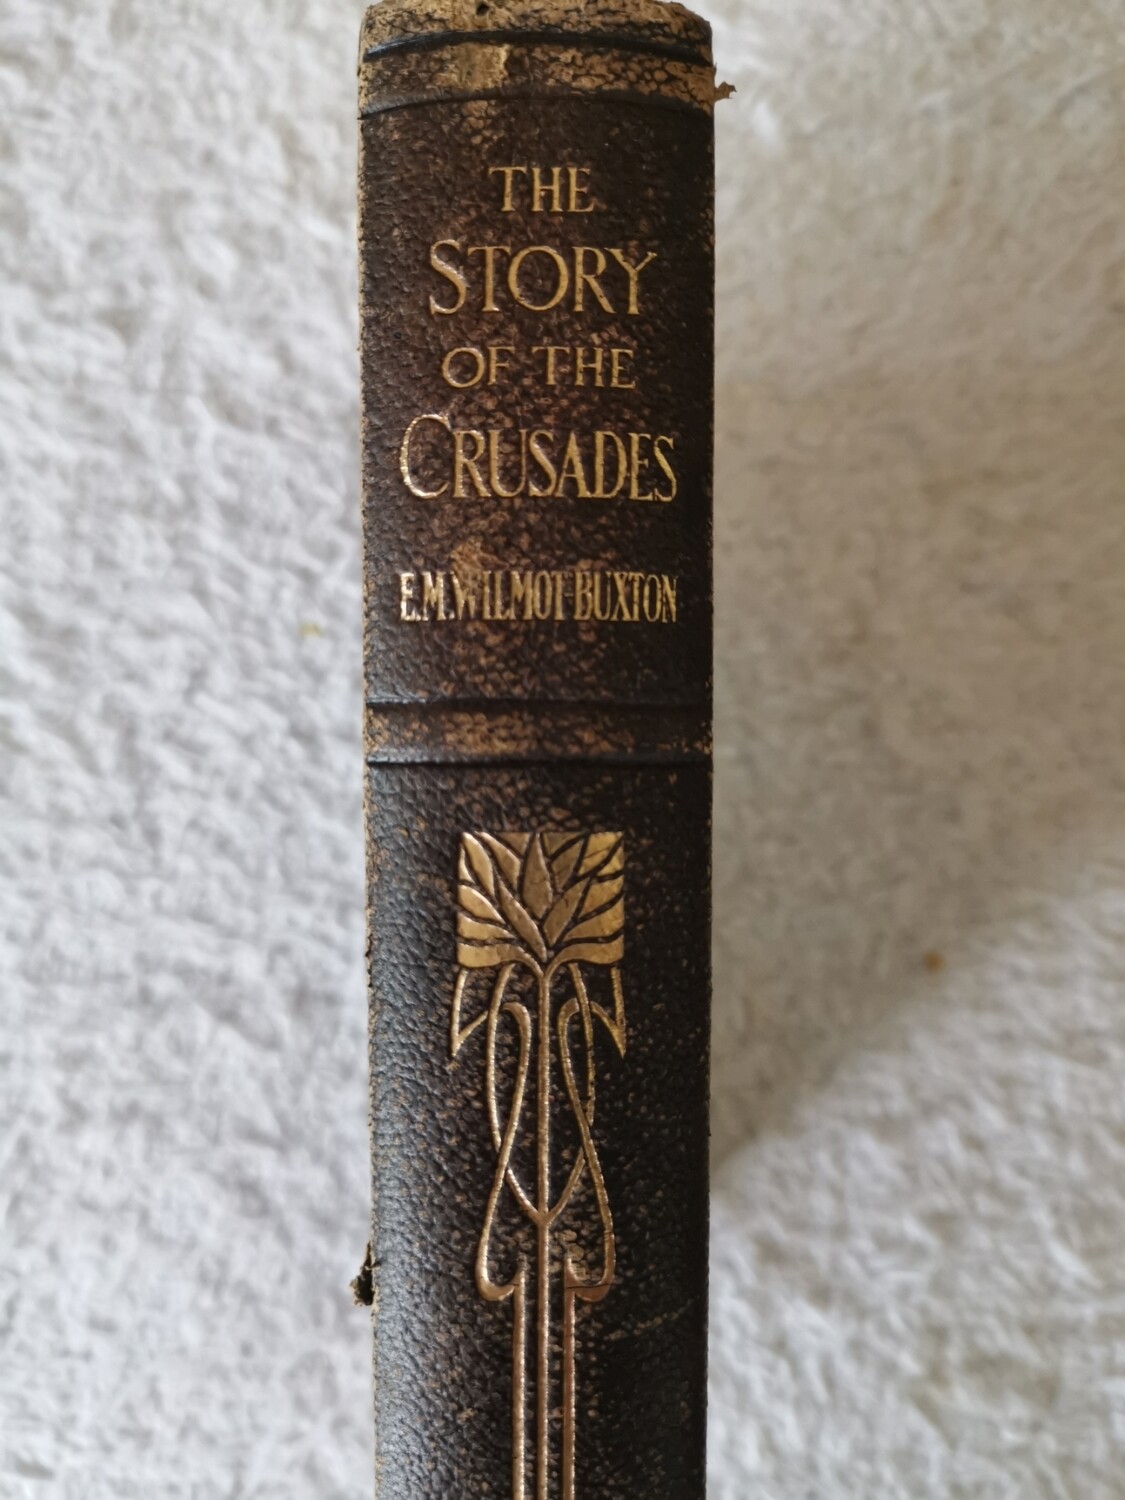 The story of the Crusades, E. M. Wilmot-Buxton